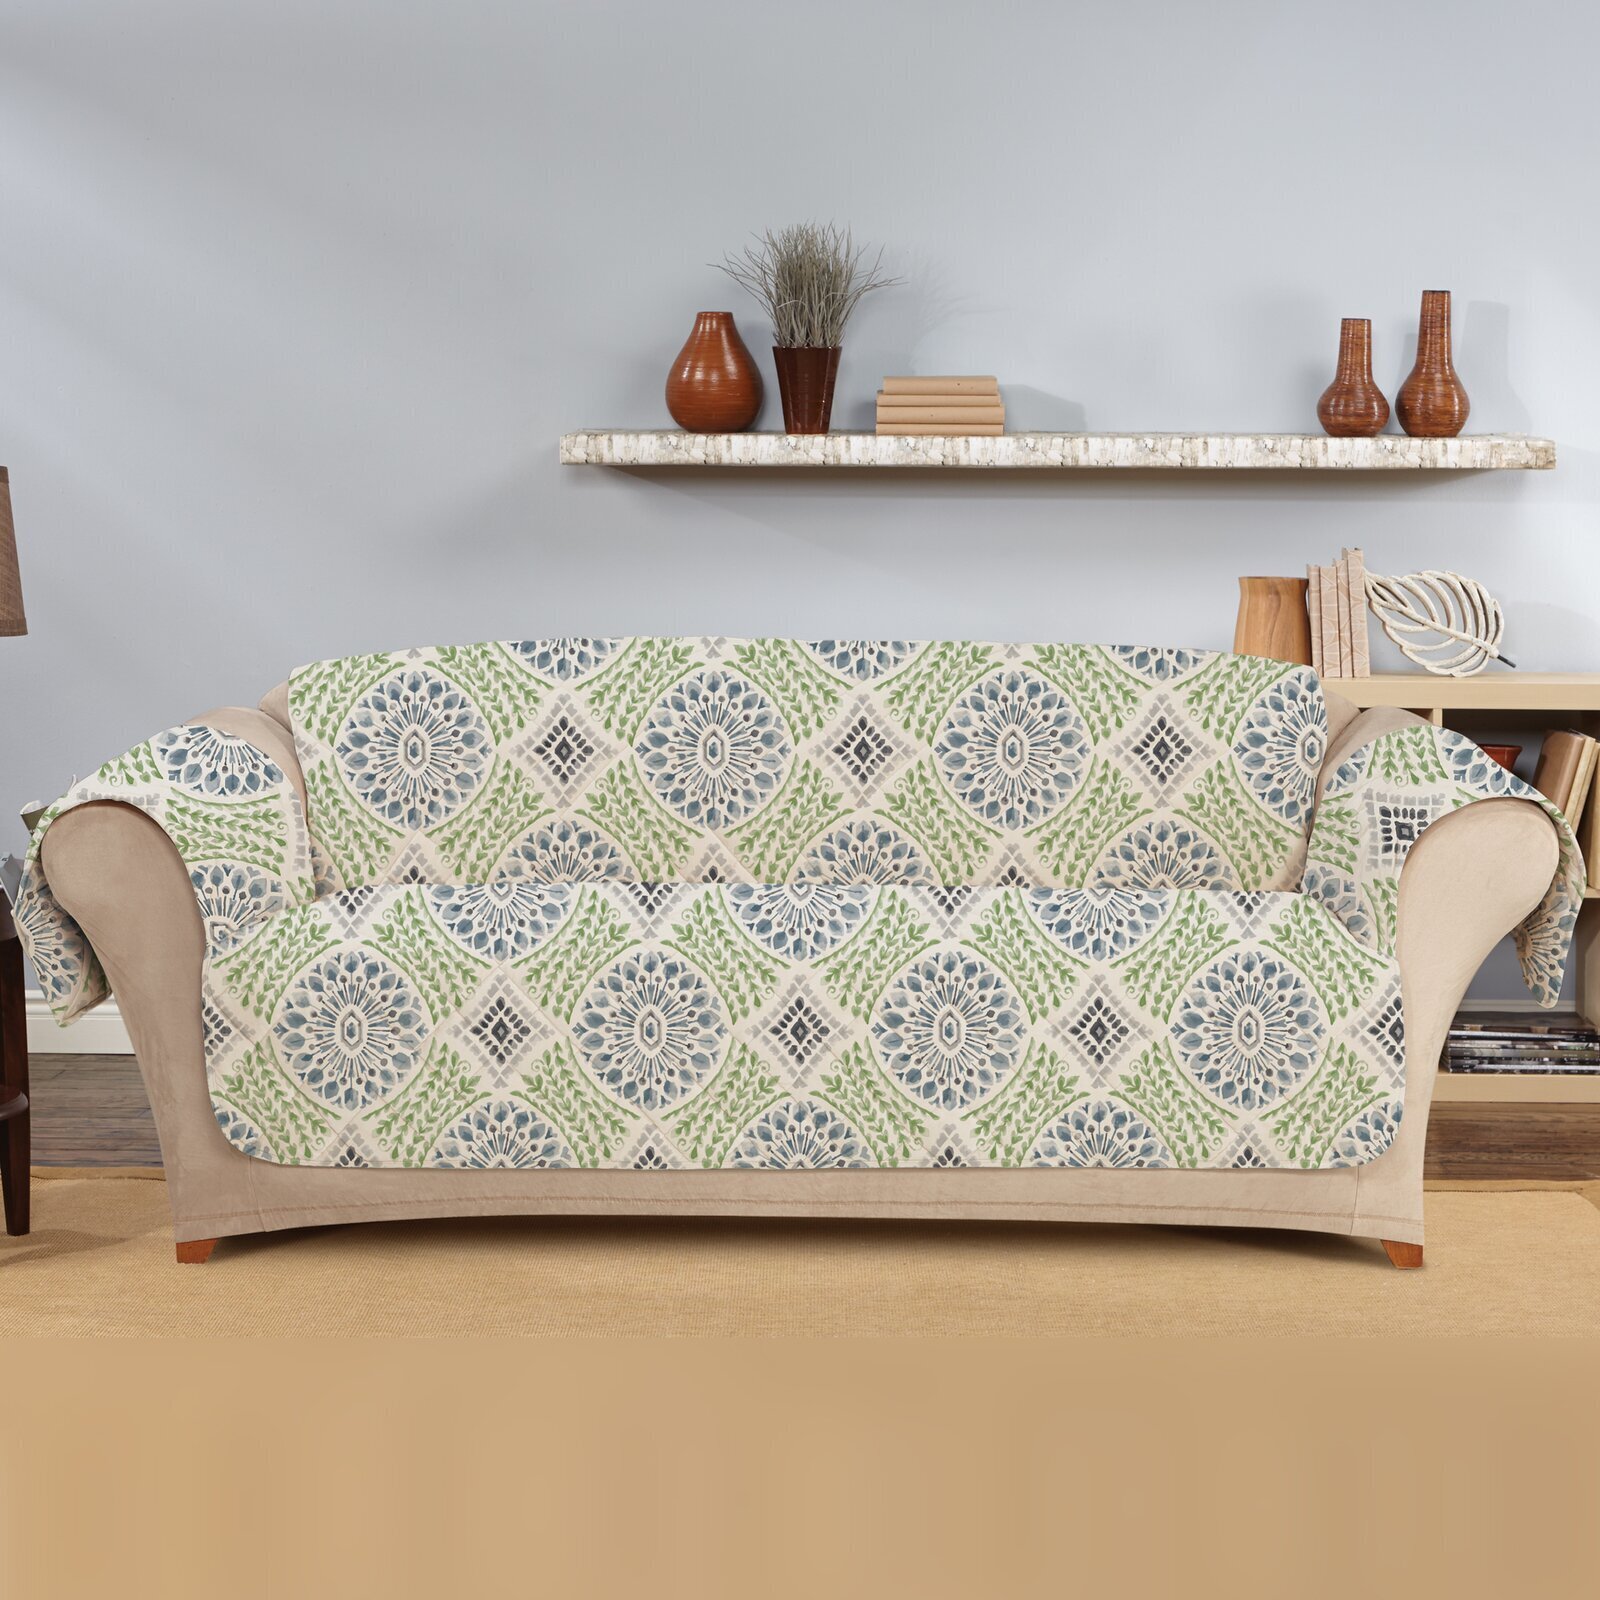 Blue Printed Country Style Sofa Covers 